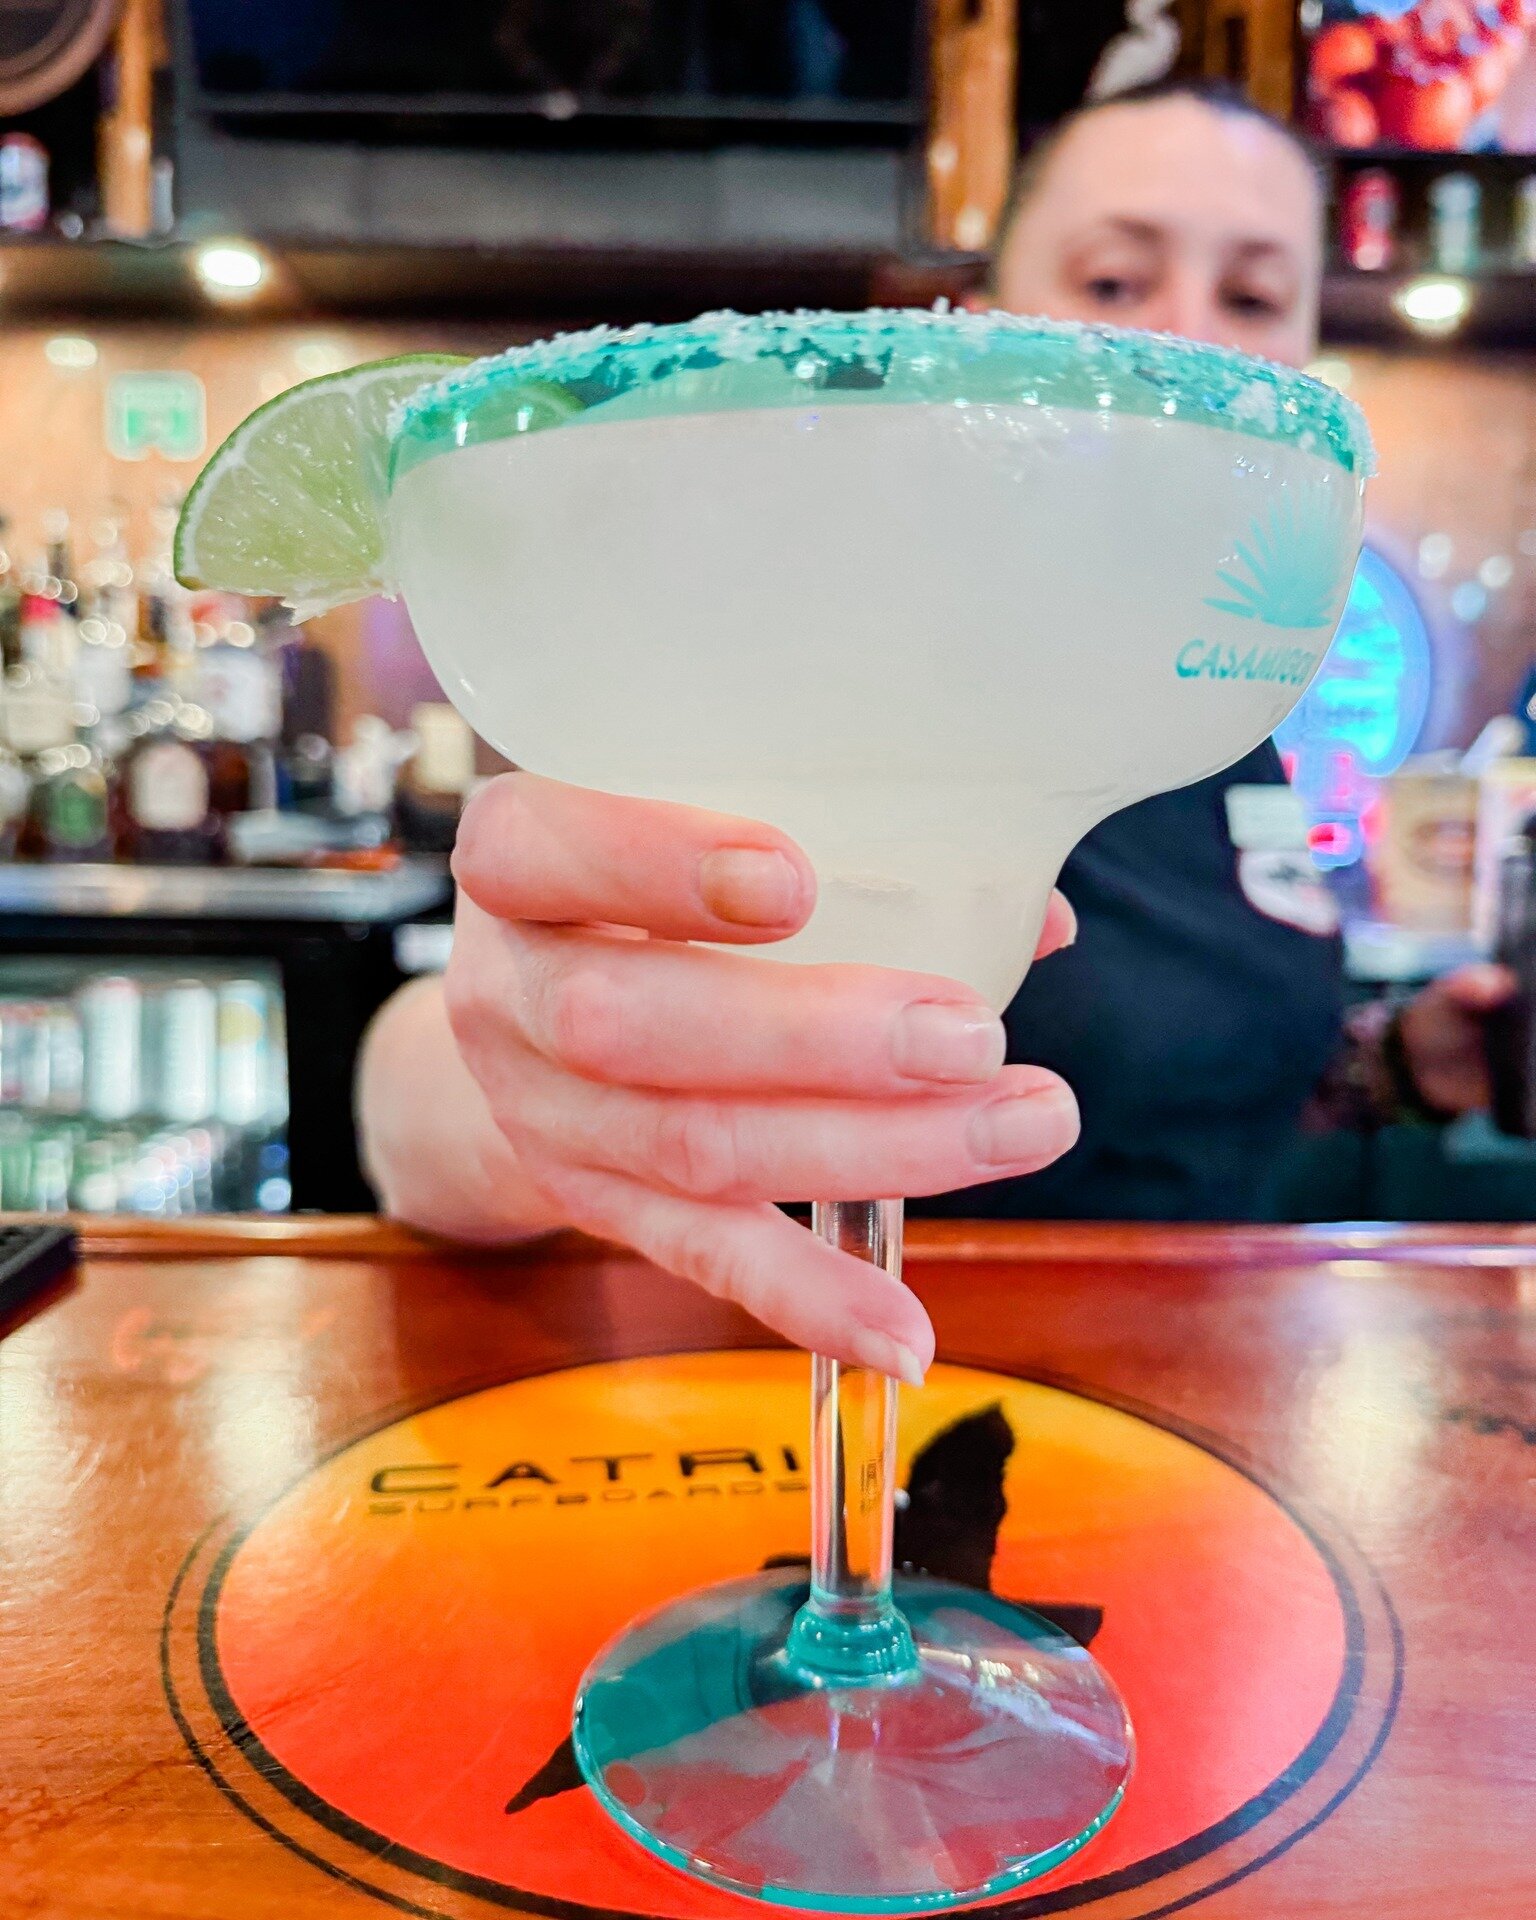 Salted rim, citrusy bliss &ndash; margaritas are the ultimate escape in a glass. Who's ready for a little cocktail therapy?
.
.
.
#spacecoast #cocoabeach #cocoabeachdining #spacecoastfood #diningincocoabeach #capecanaveral #melbournefl #lovefl #flori